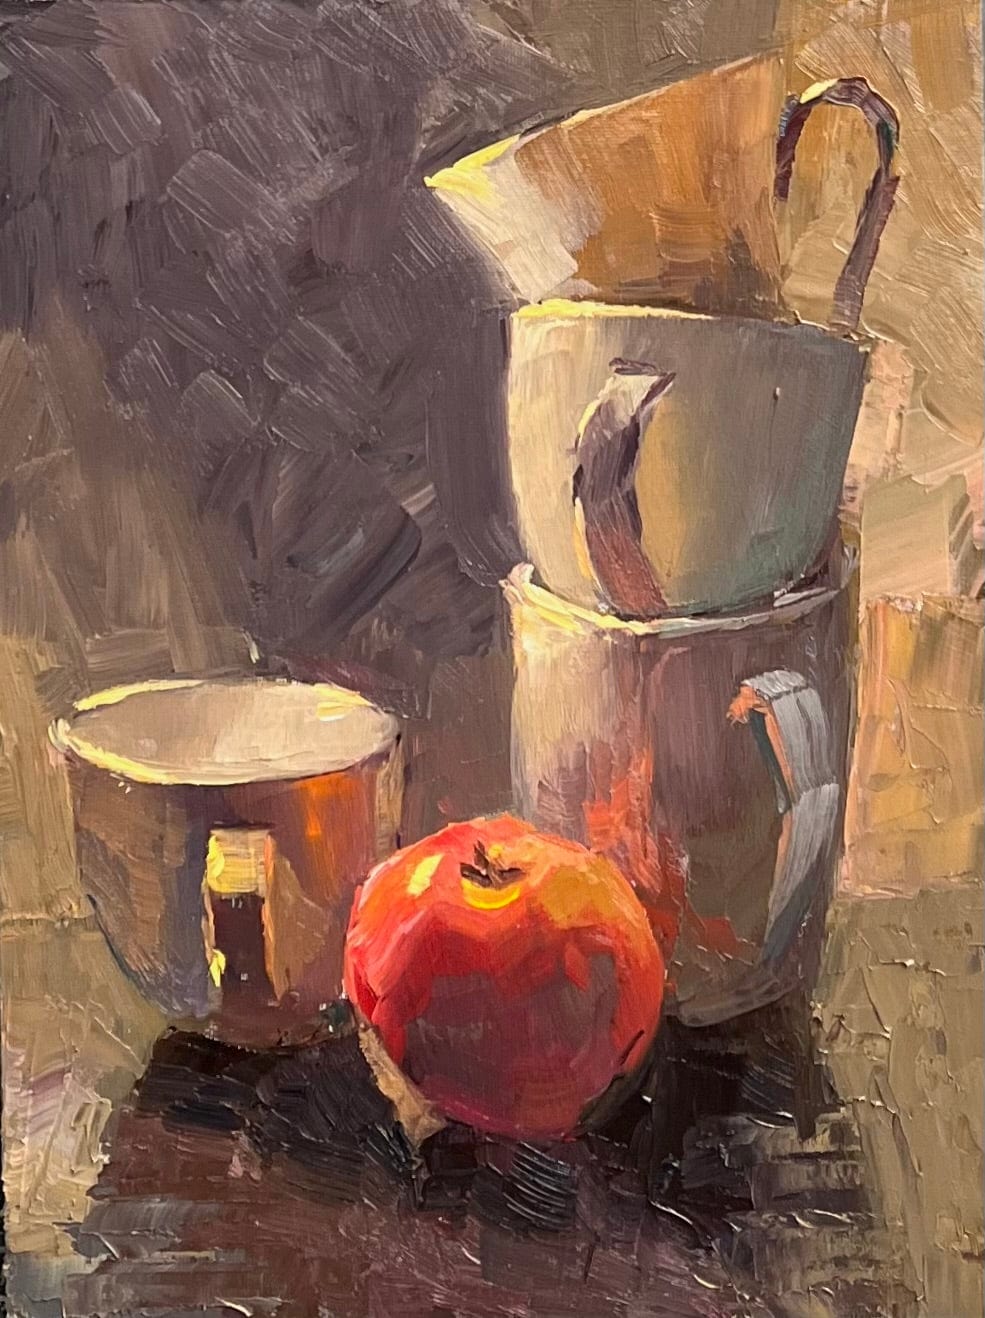 Dwarfed by cups - Backlit - Small Original Oil Painting